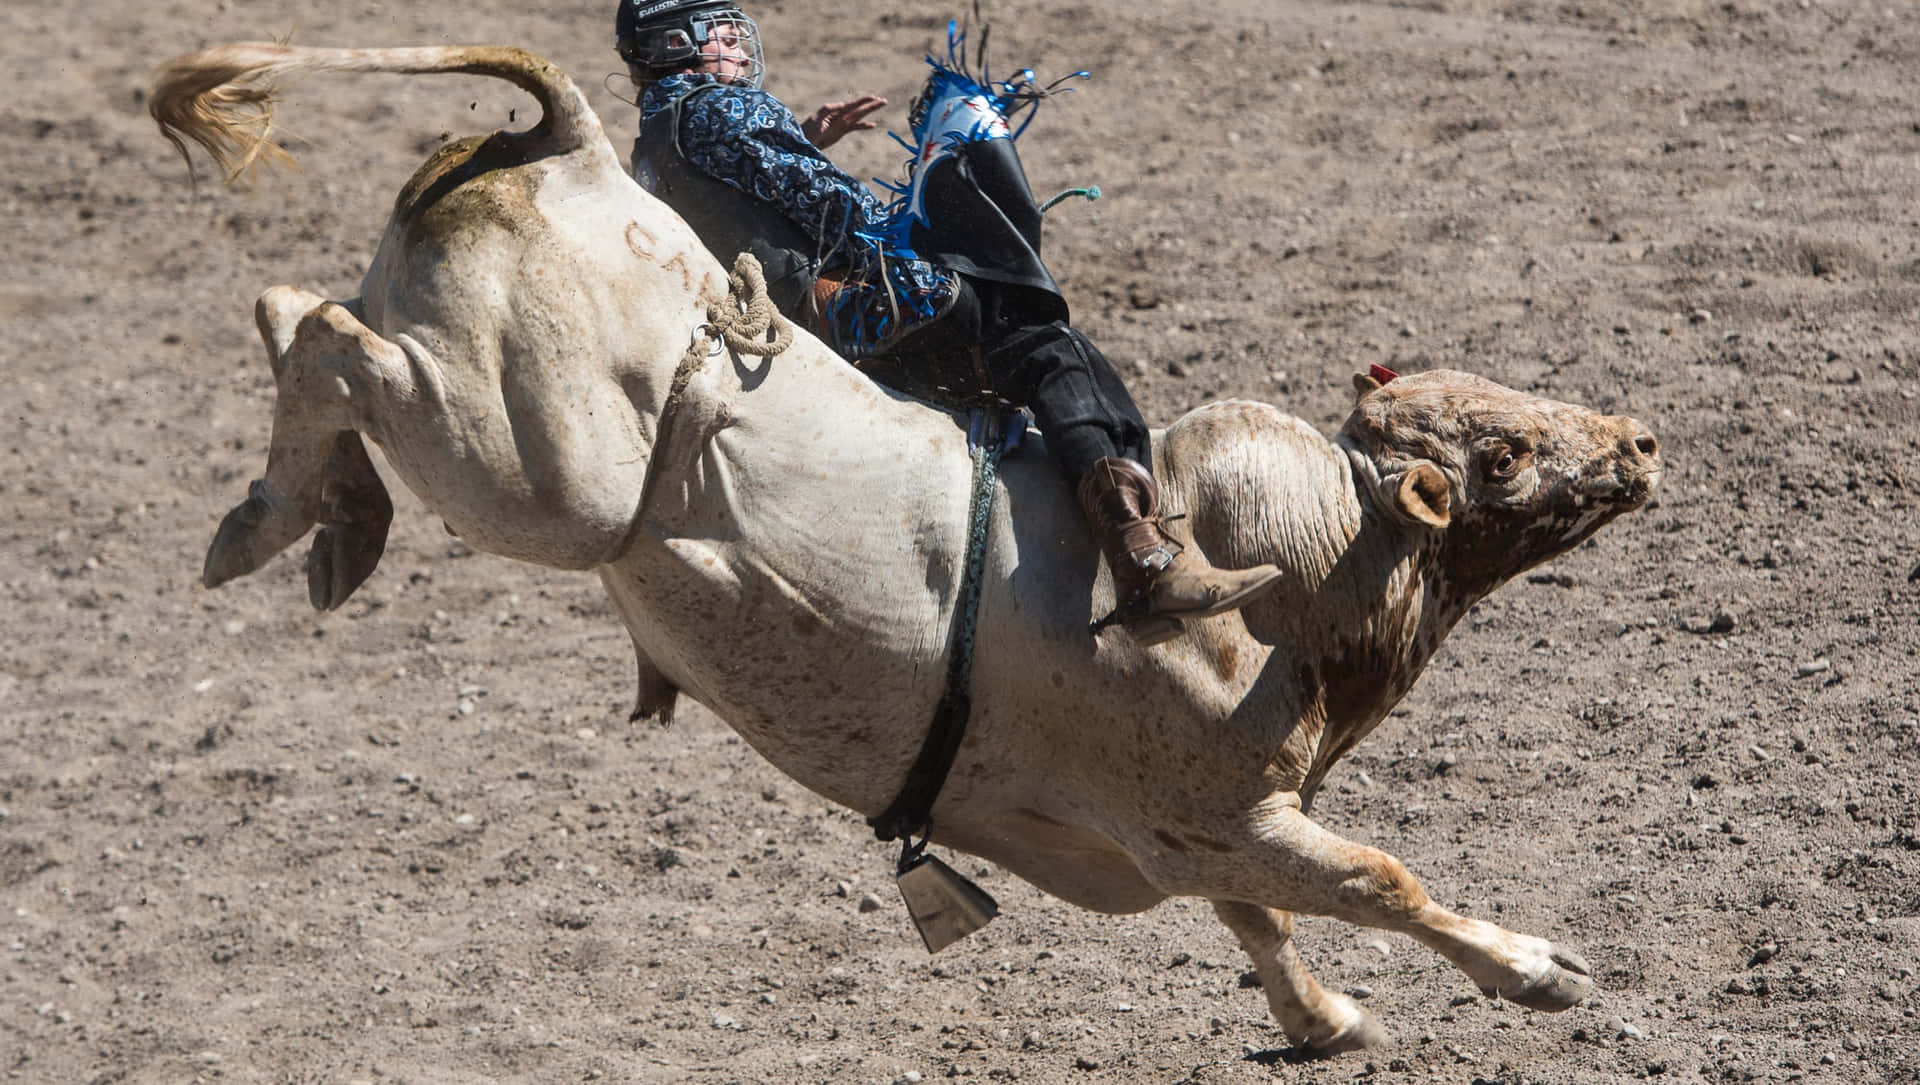 "Steer Wrestler Going for the Finish at a Rodeo Event"